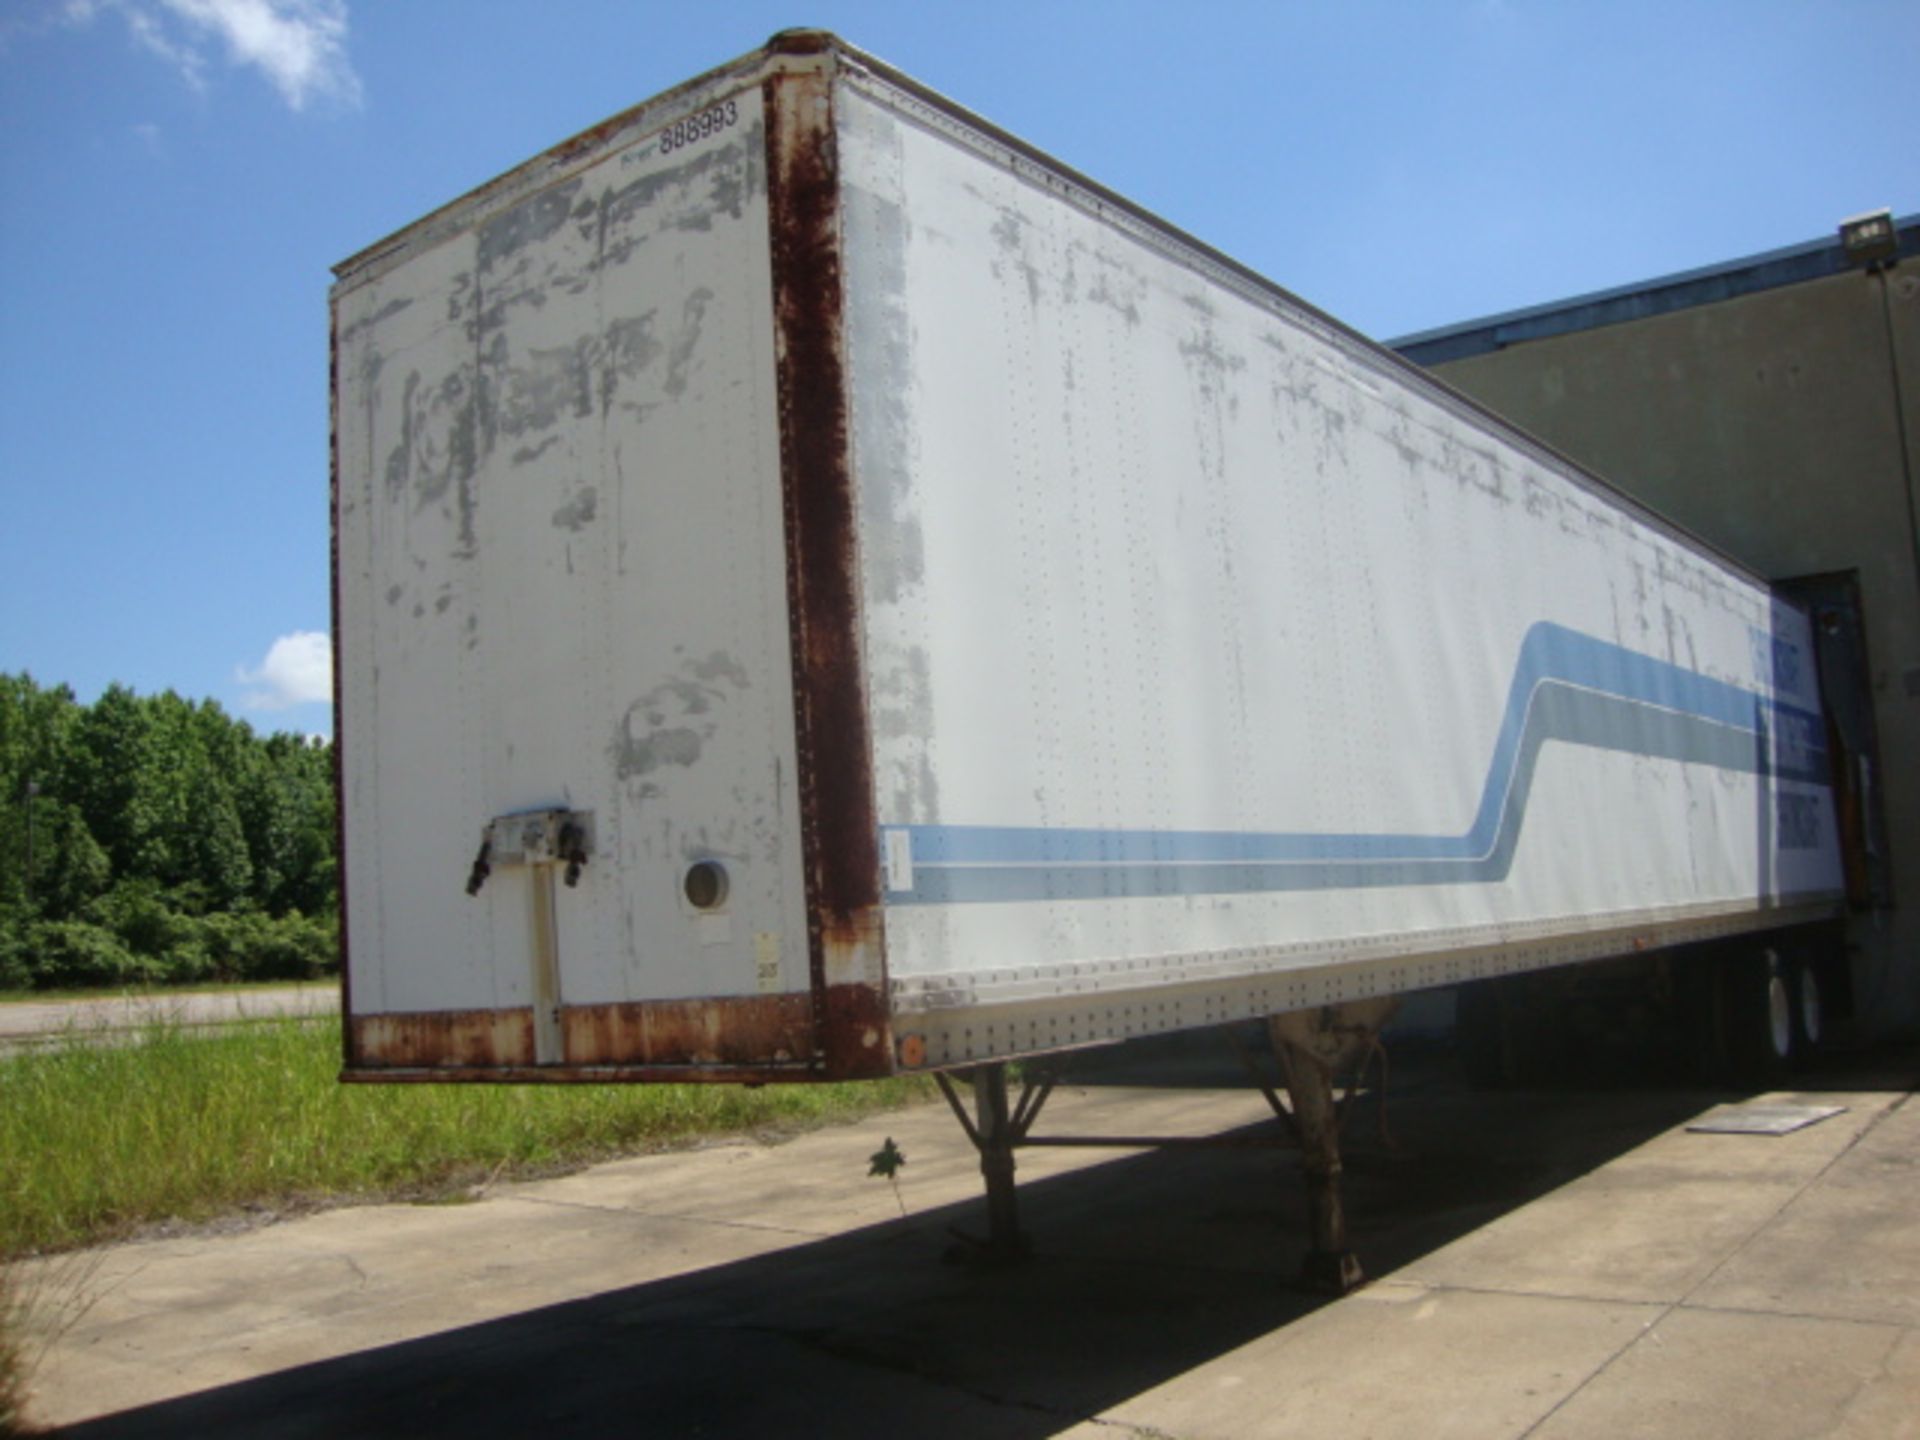 BOX TRAILER, STRICK 42', tandem axle, Trailer I.D. No. 888993 (no title - yard use only)